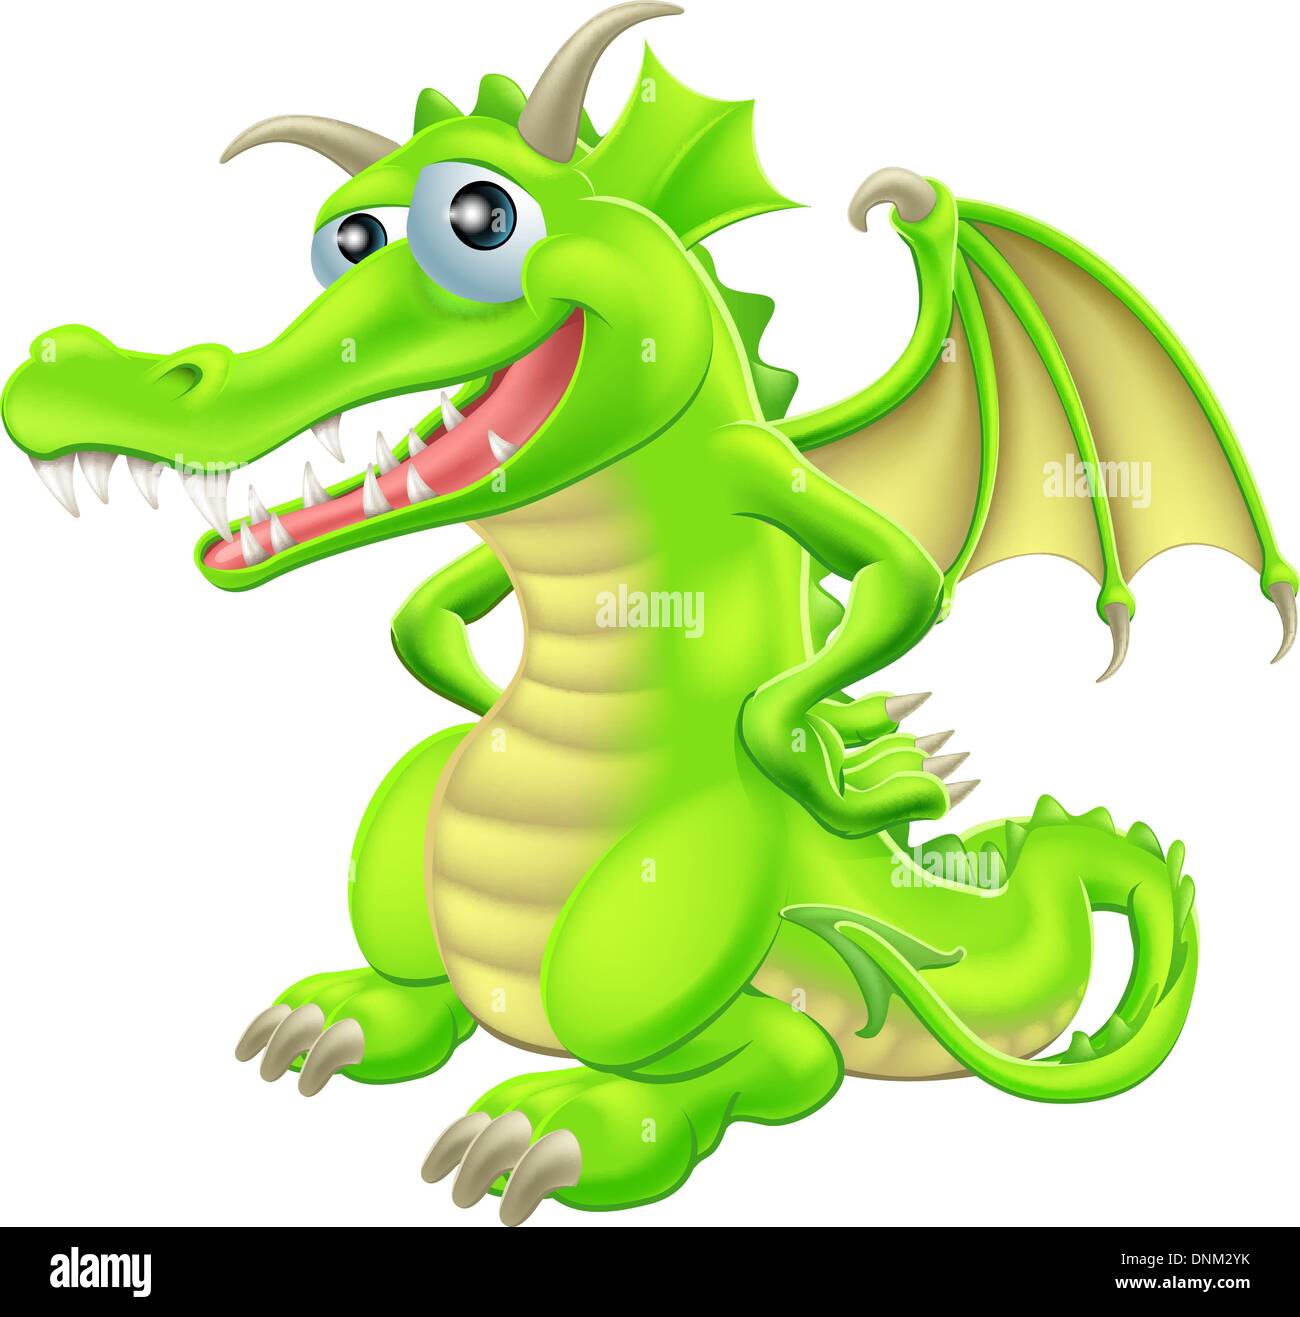 An illustration of a green cartoon happy dragon character standing with hand on hips Stock Vector